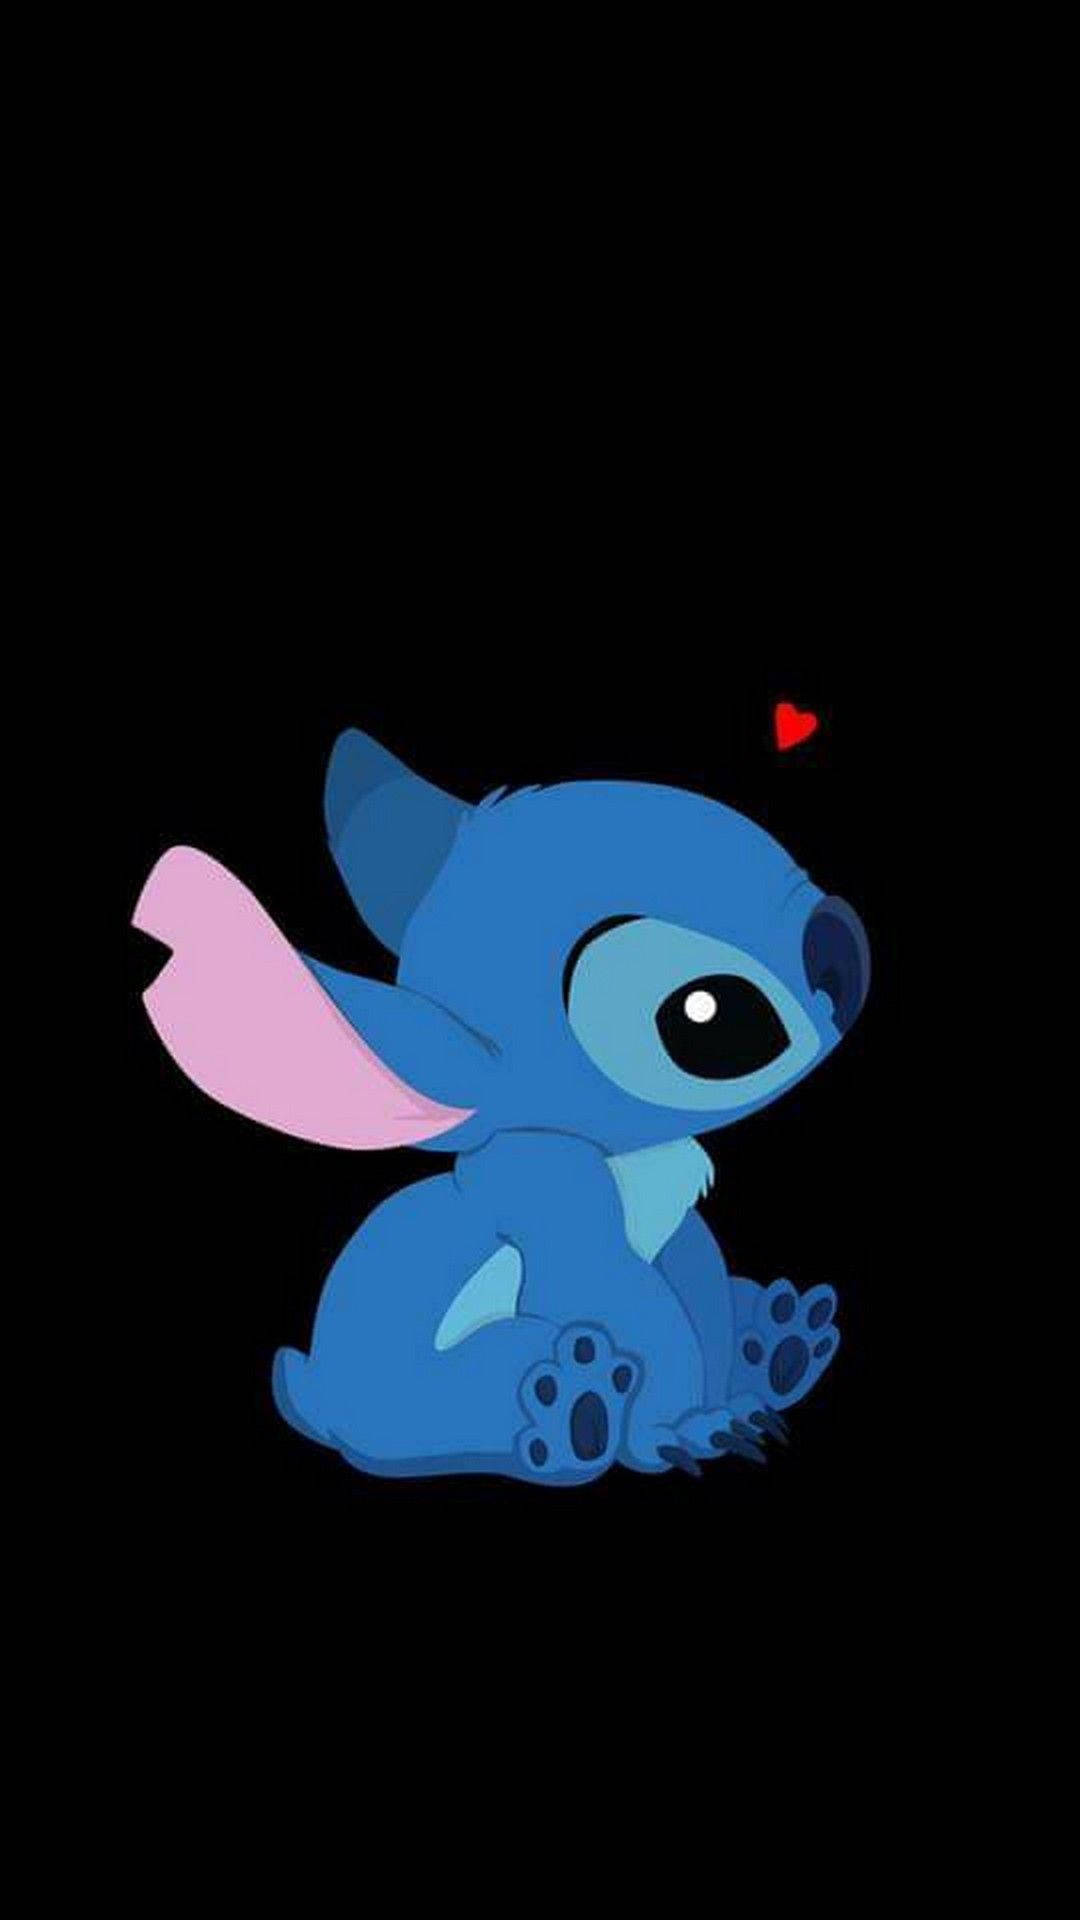 Stitch with a little red heart in black wallpaper.